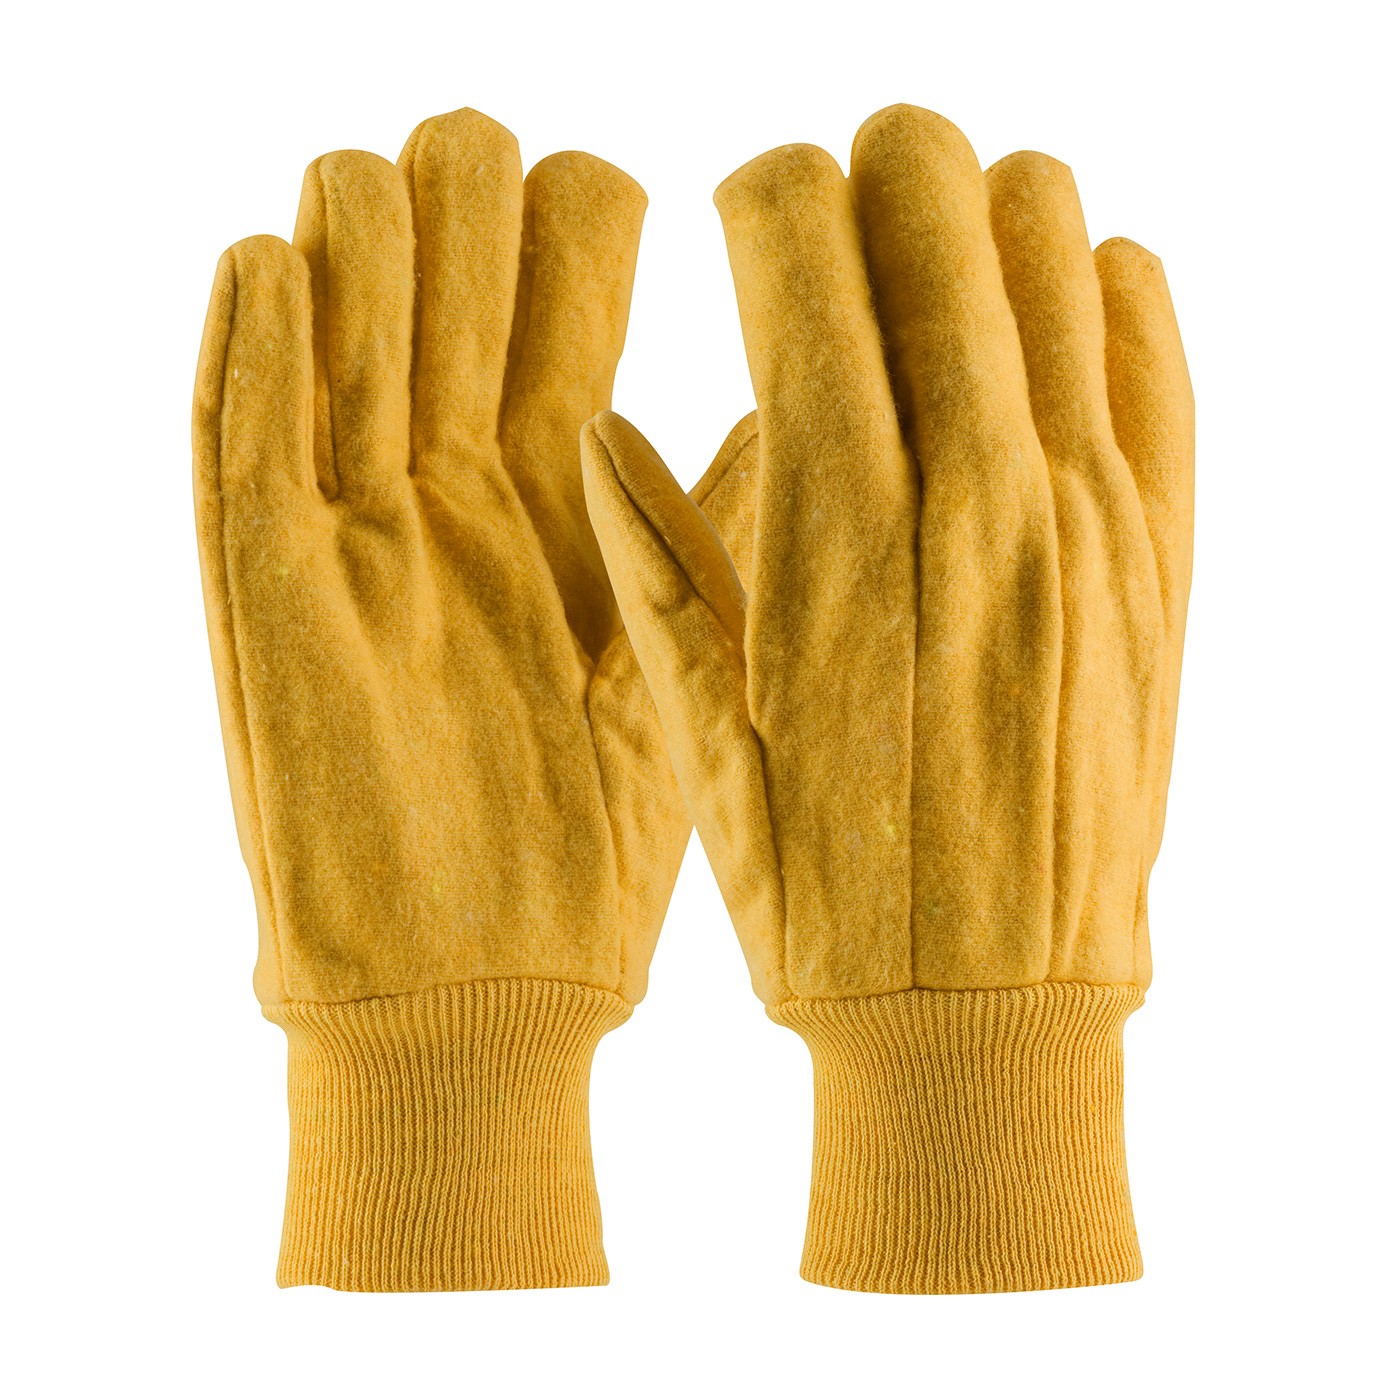 PIP® Economy Grade Cotton Chore Glove with Single Layer Palm/Back and Nap-out Finish - Knit Wrist  (#93-568)